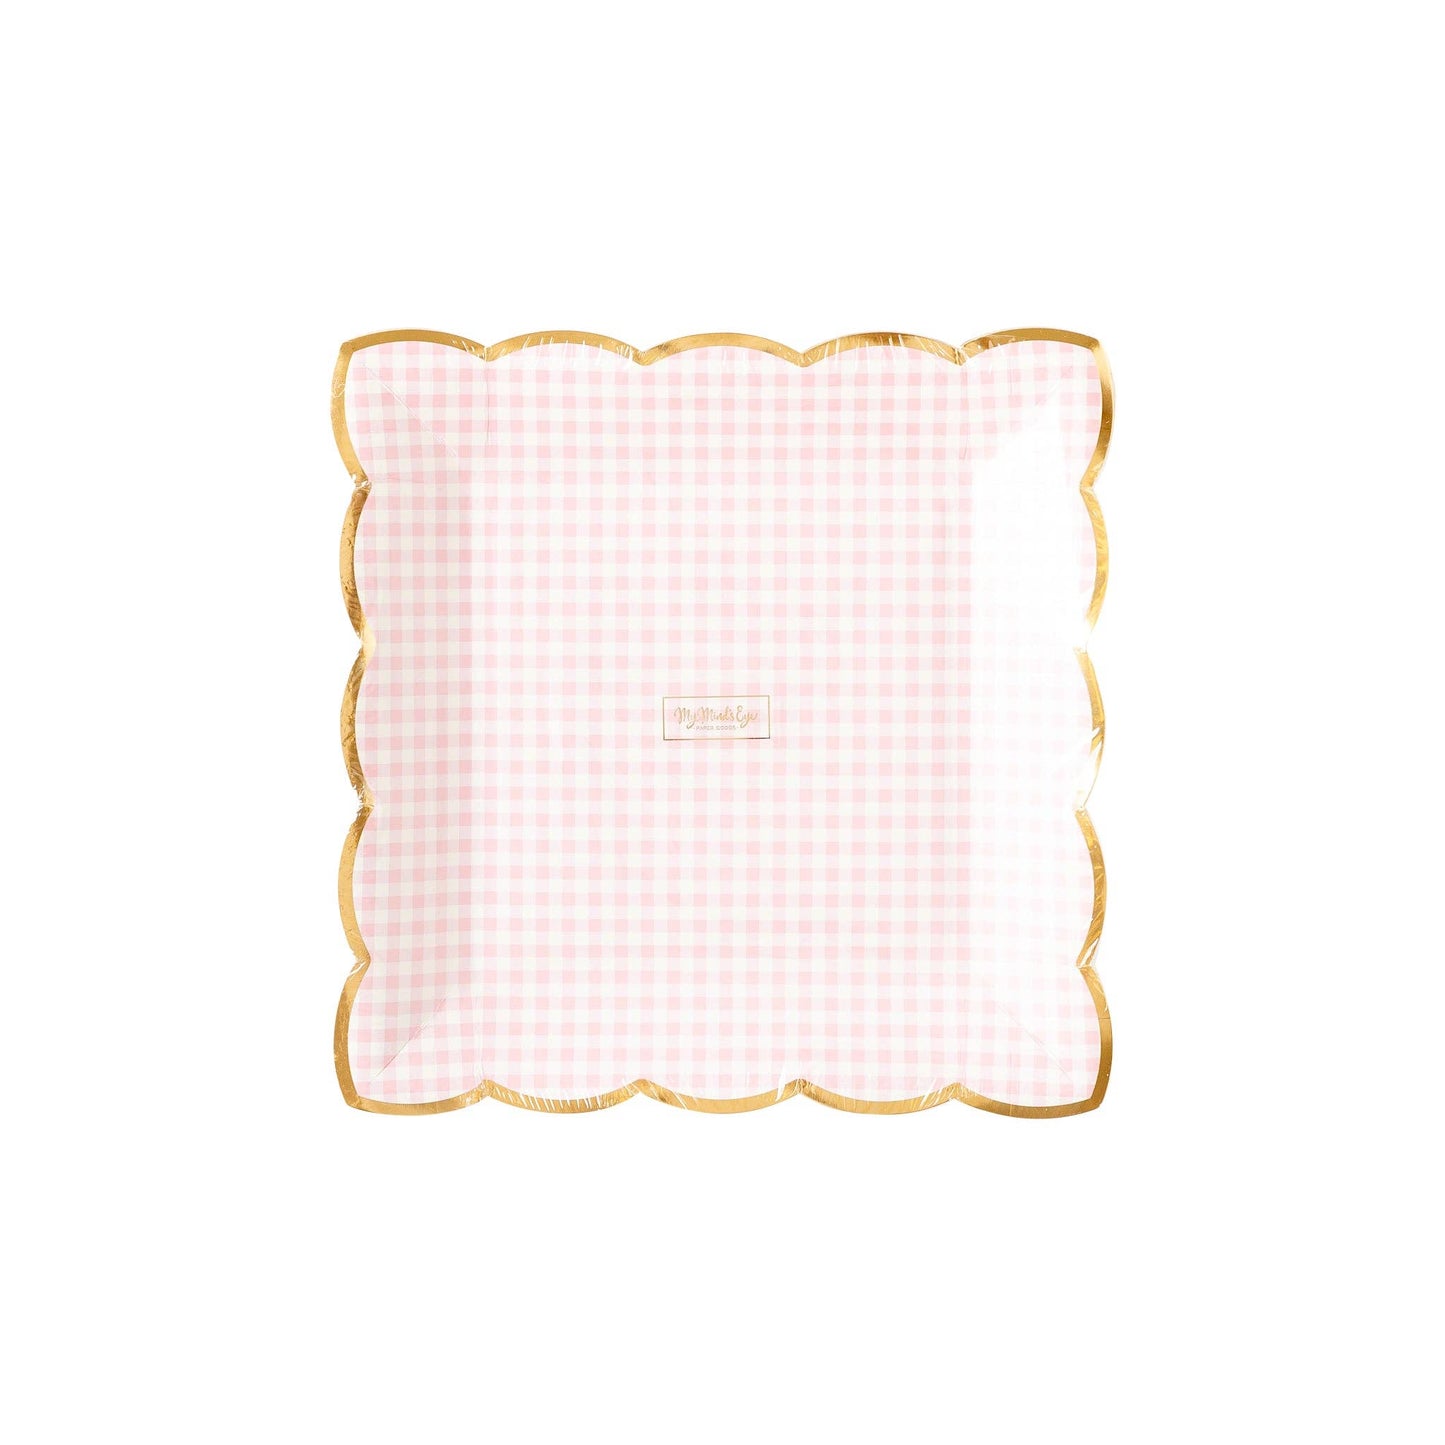 Scalloped Pink Gingham Plate